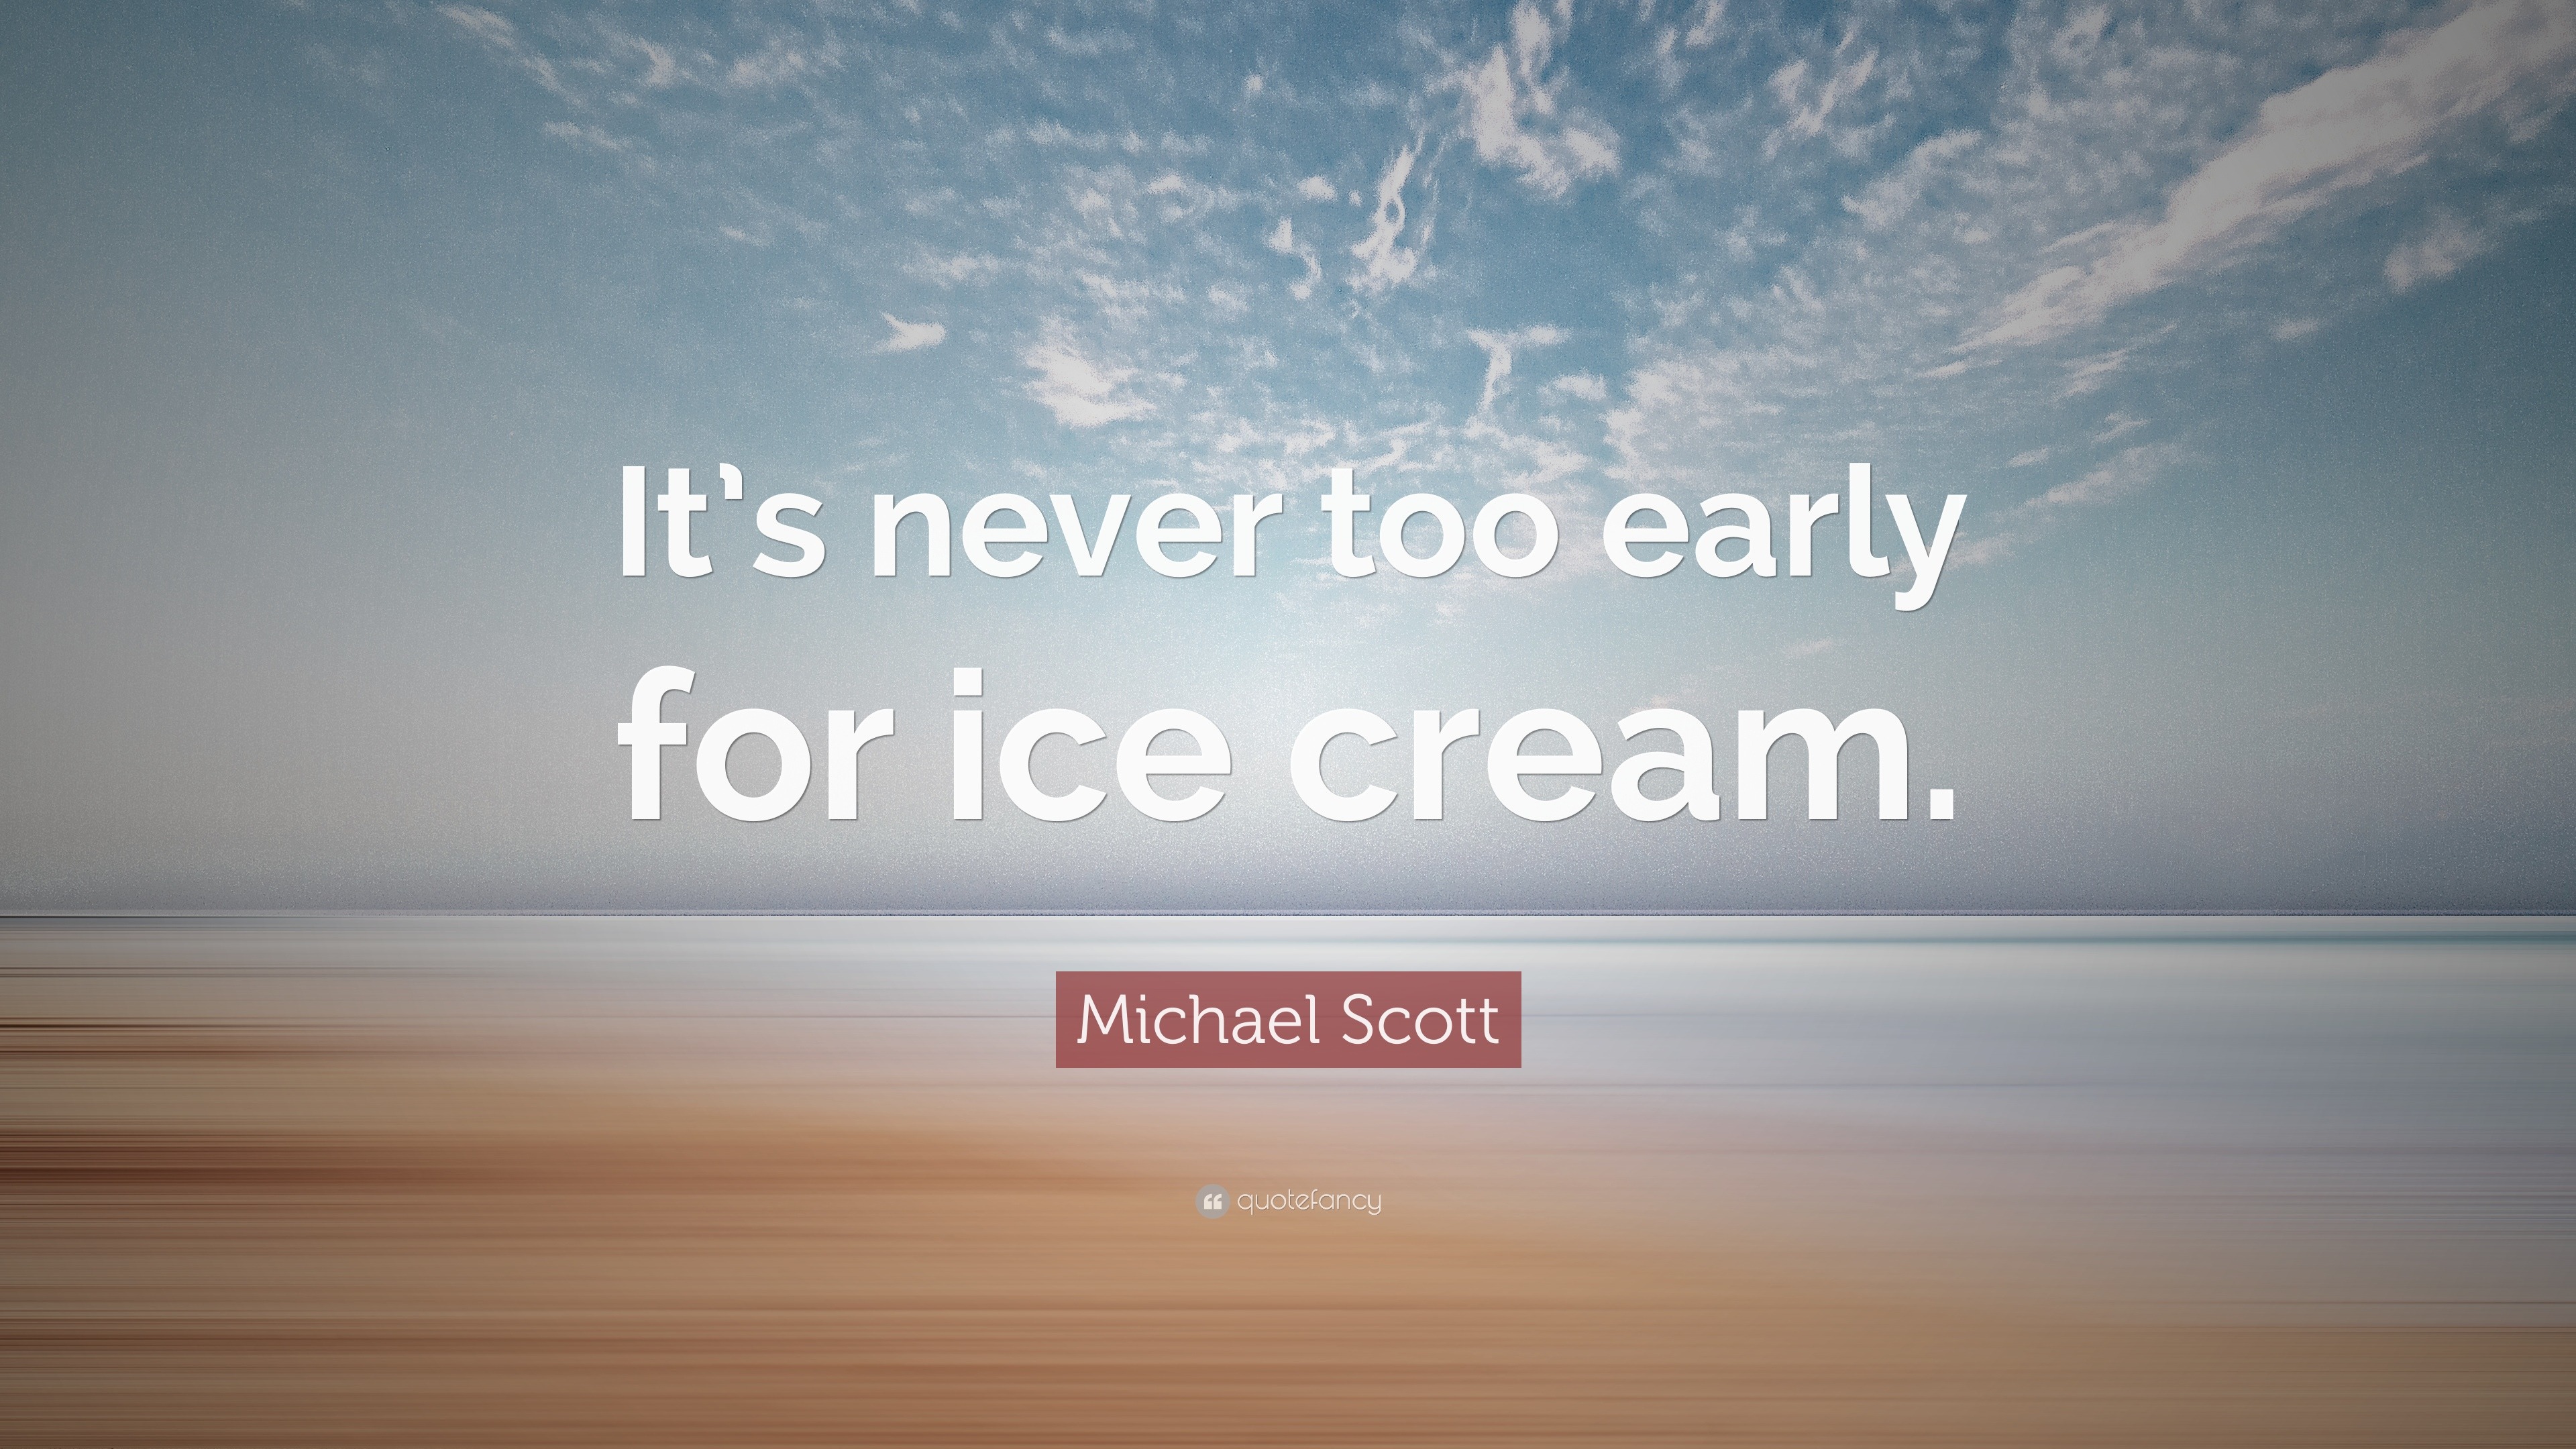 Michael Scott Quote: "It's never too early for ice cream." (12 wallpapers) - Quotefancy